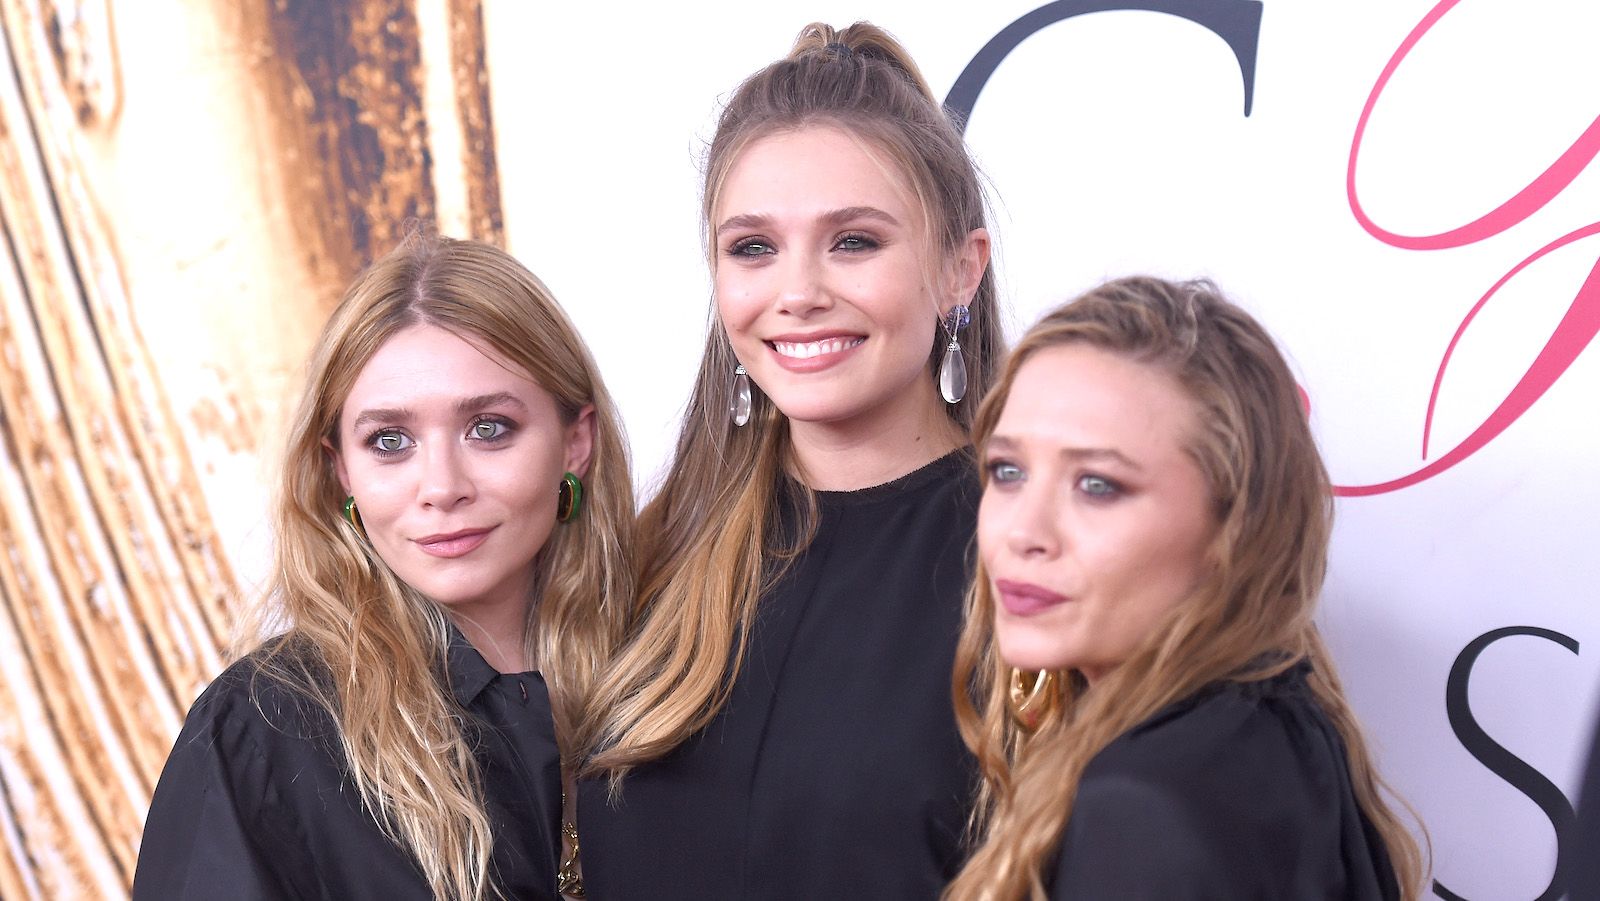 Elizabeth Olsen opens up about being the ‘other’ Olsen sister